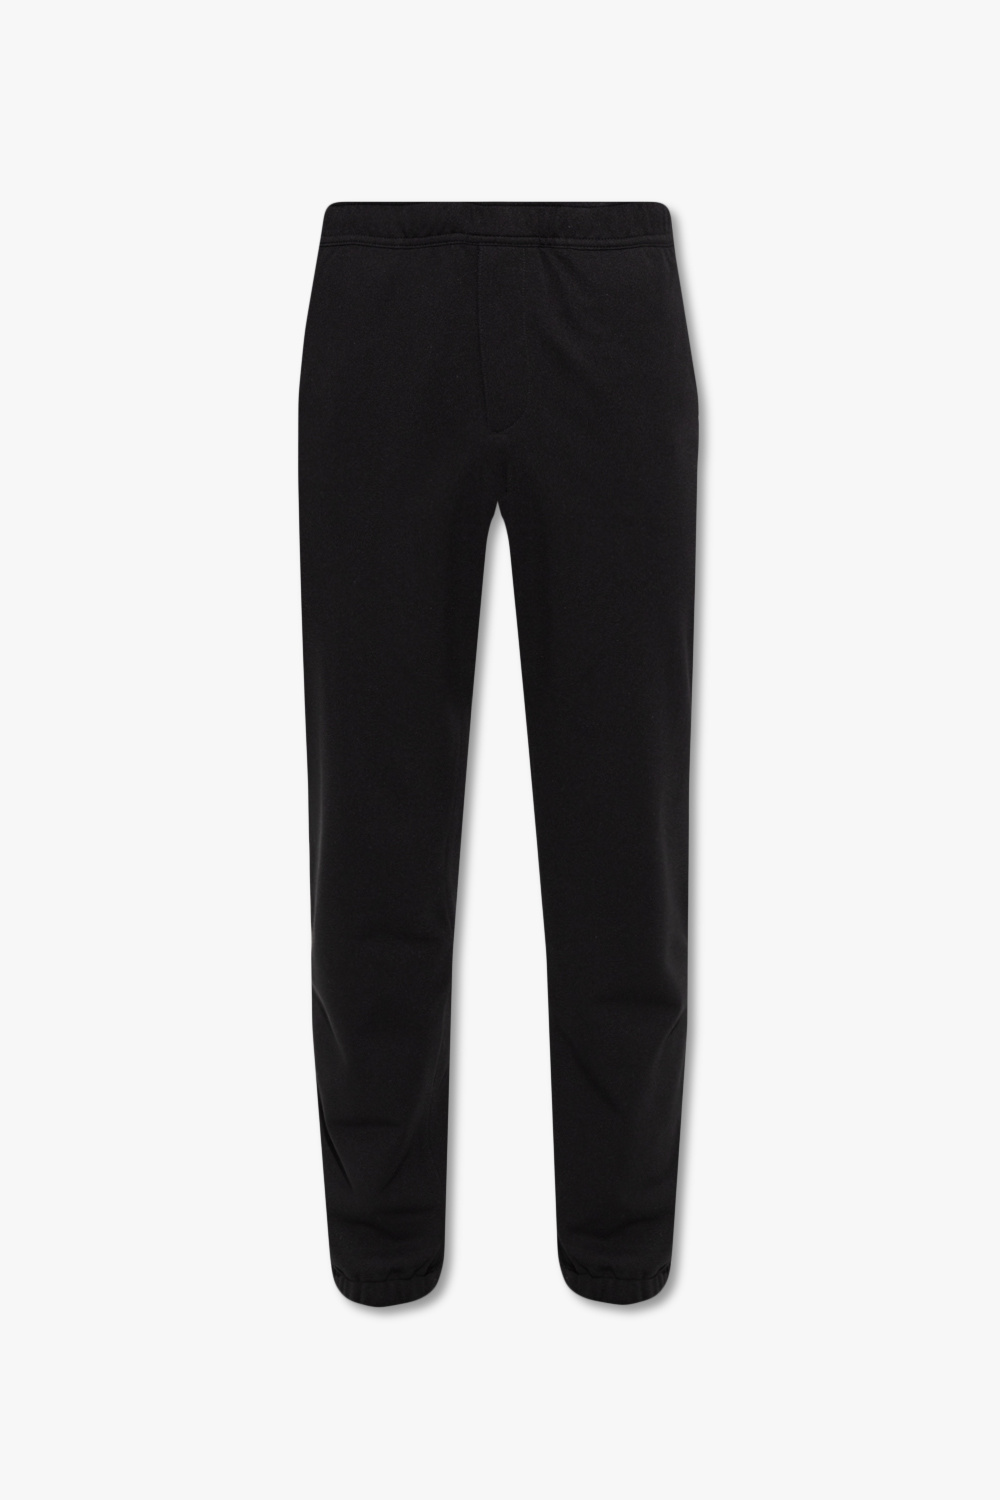 Theory Sweatpants with pockets